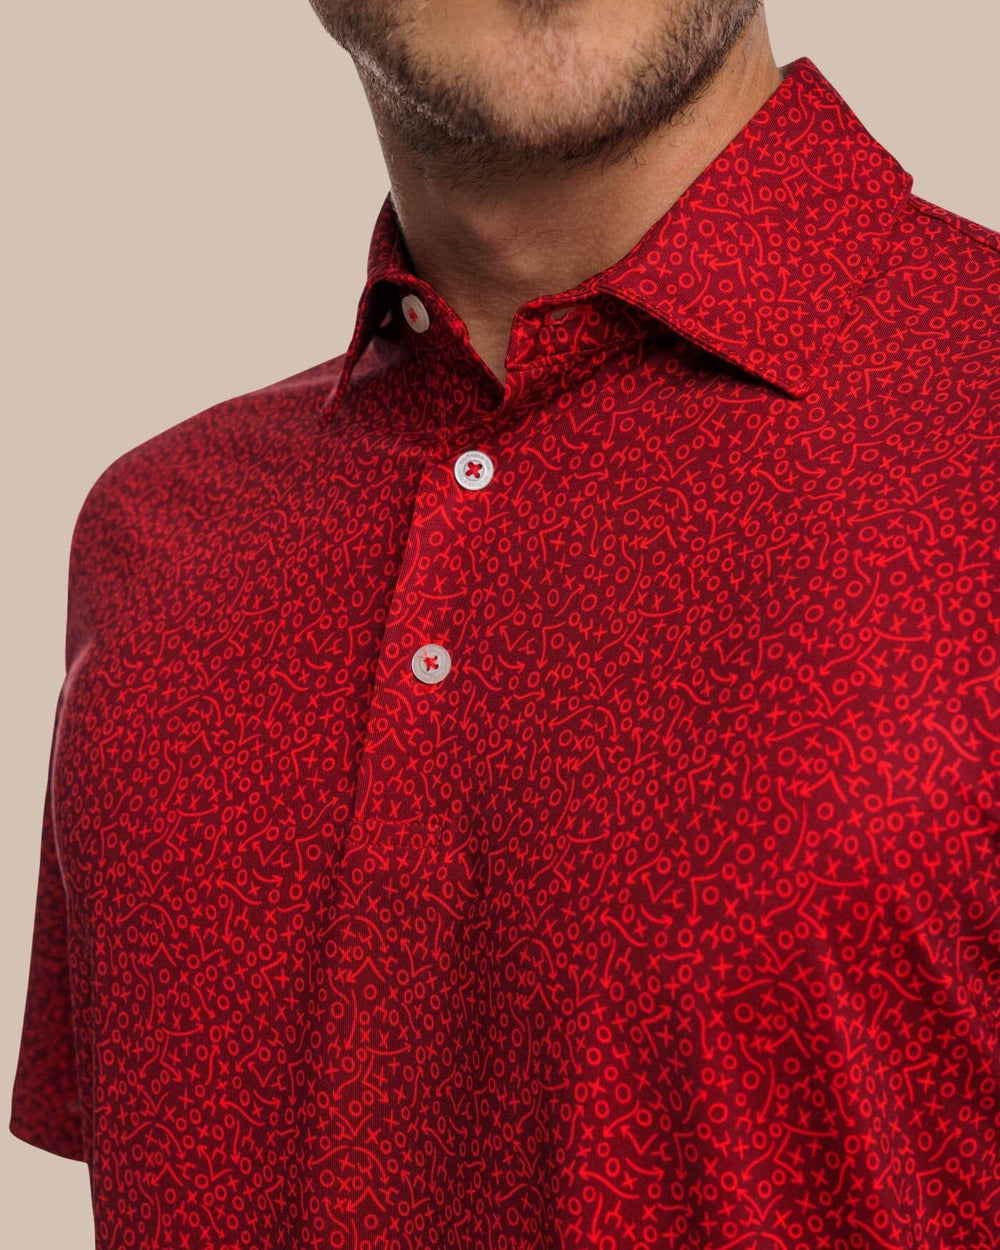 The detail view of the Southern Tide Driver Gameplay Polo by Southern Tide - Chianti